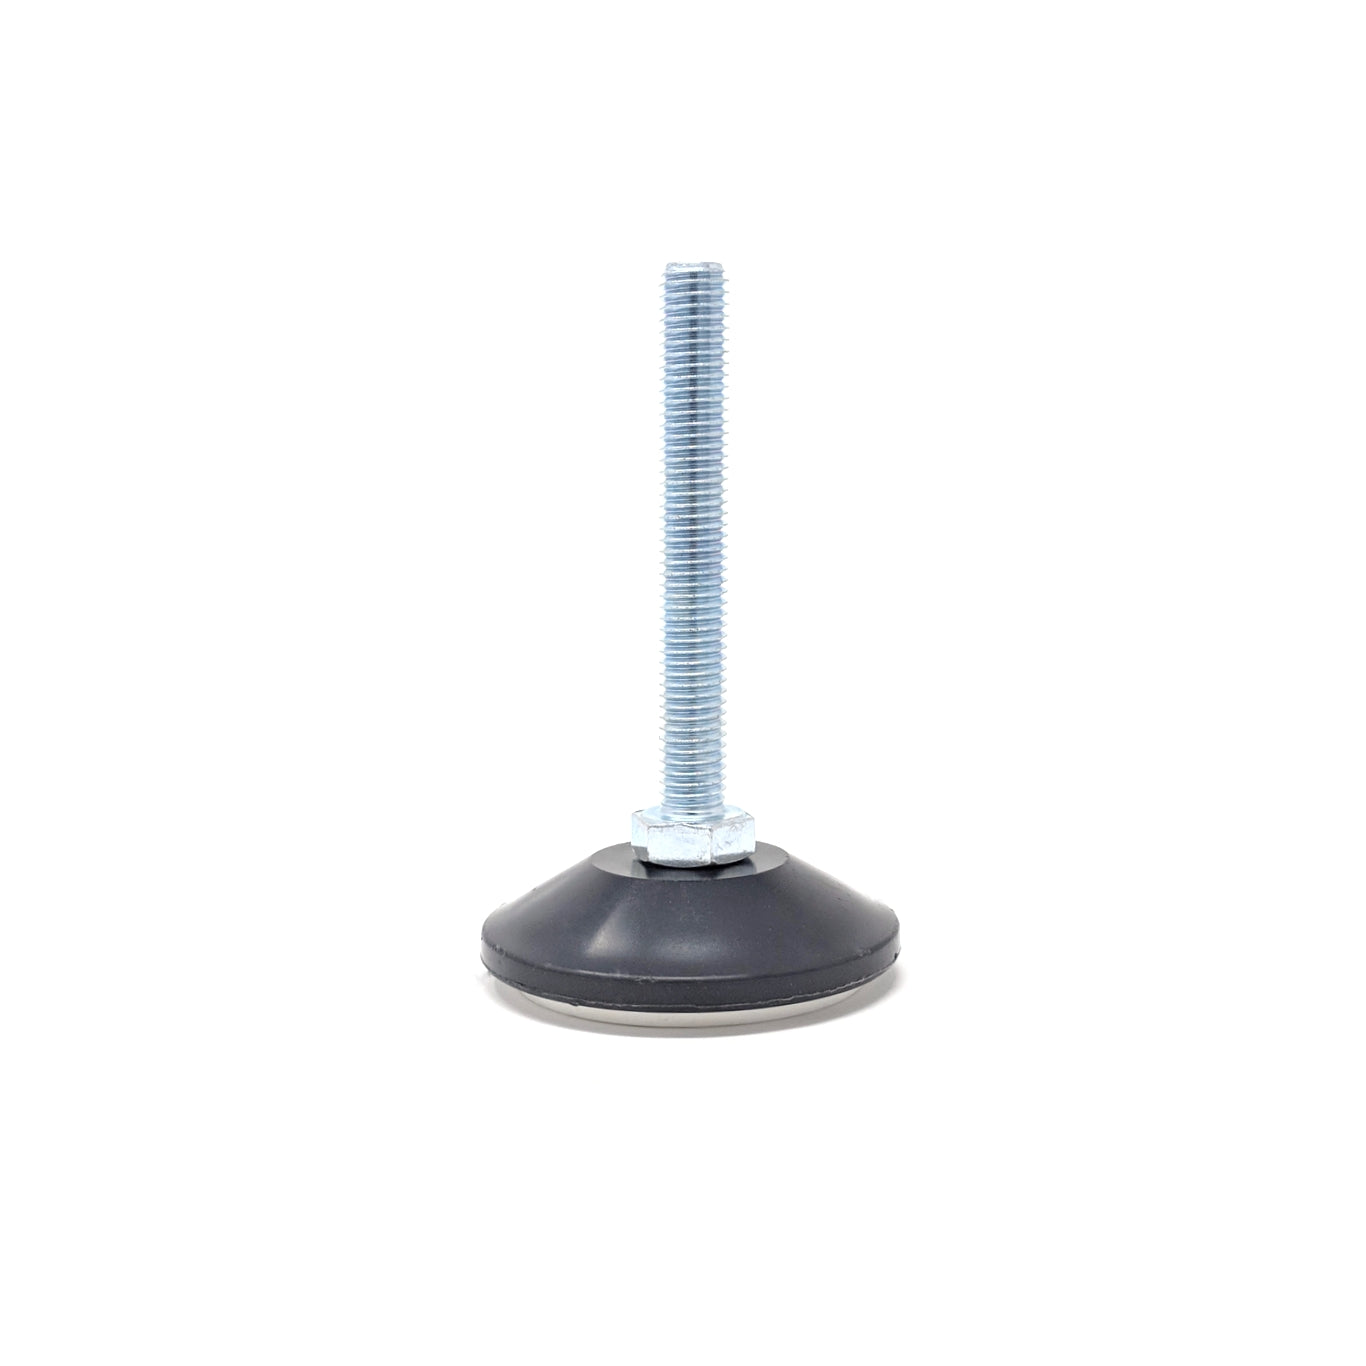 48mm-M8x60mm Non-Slip Screw In Levelling Machine Feet Height Adjustable, Made In Germany - Keay Vital Parts